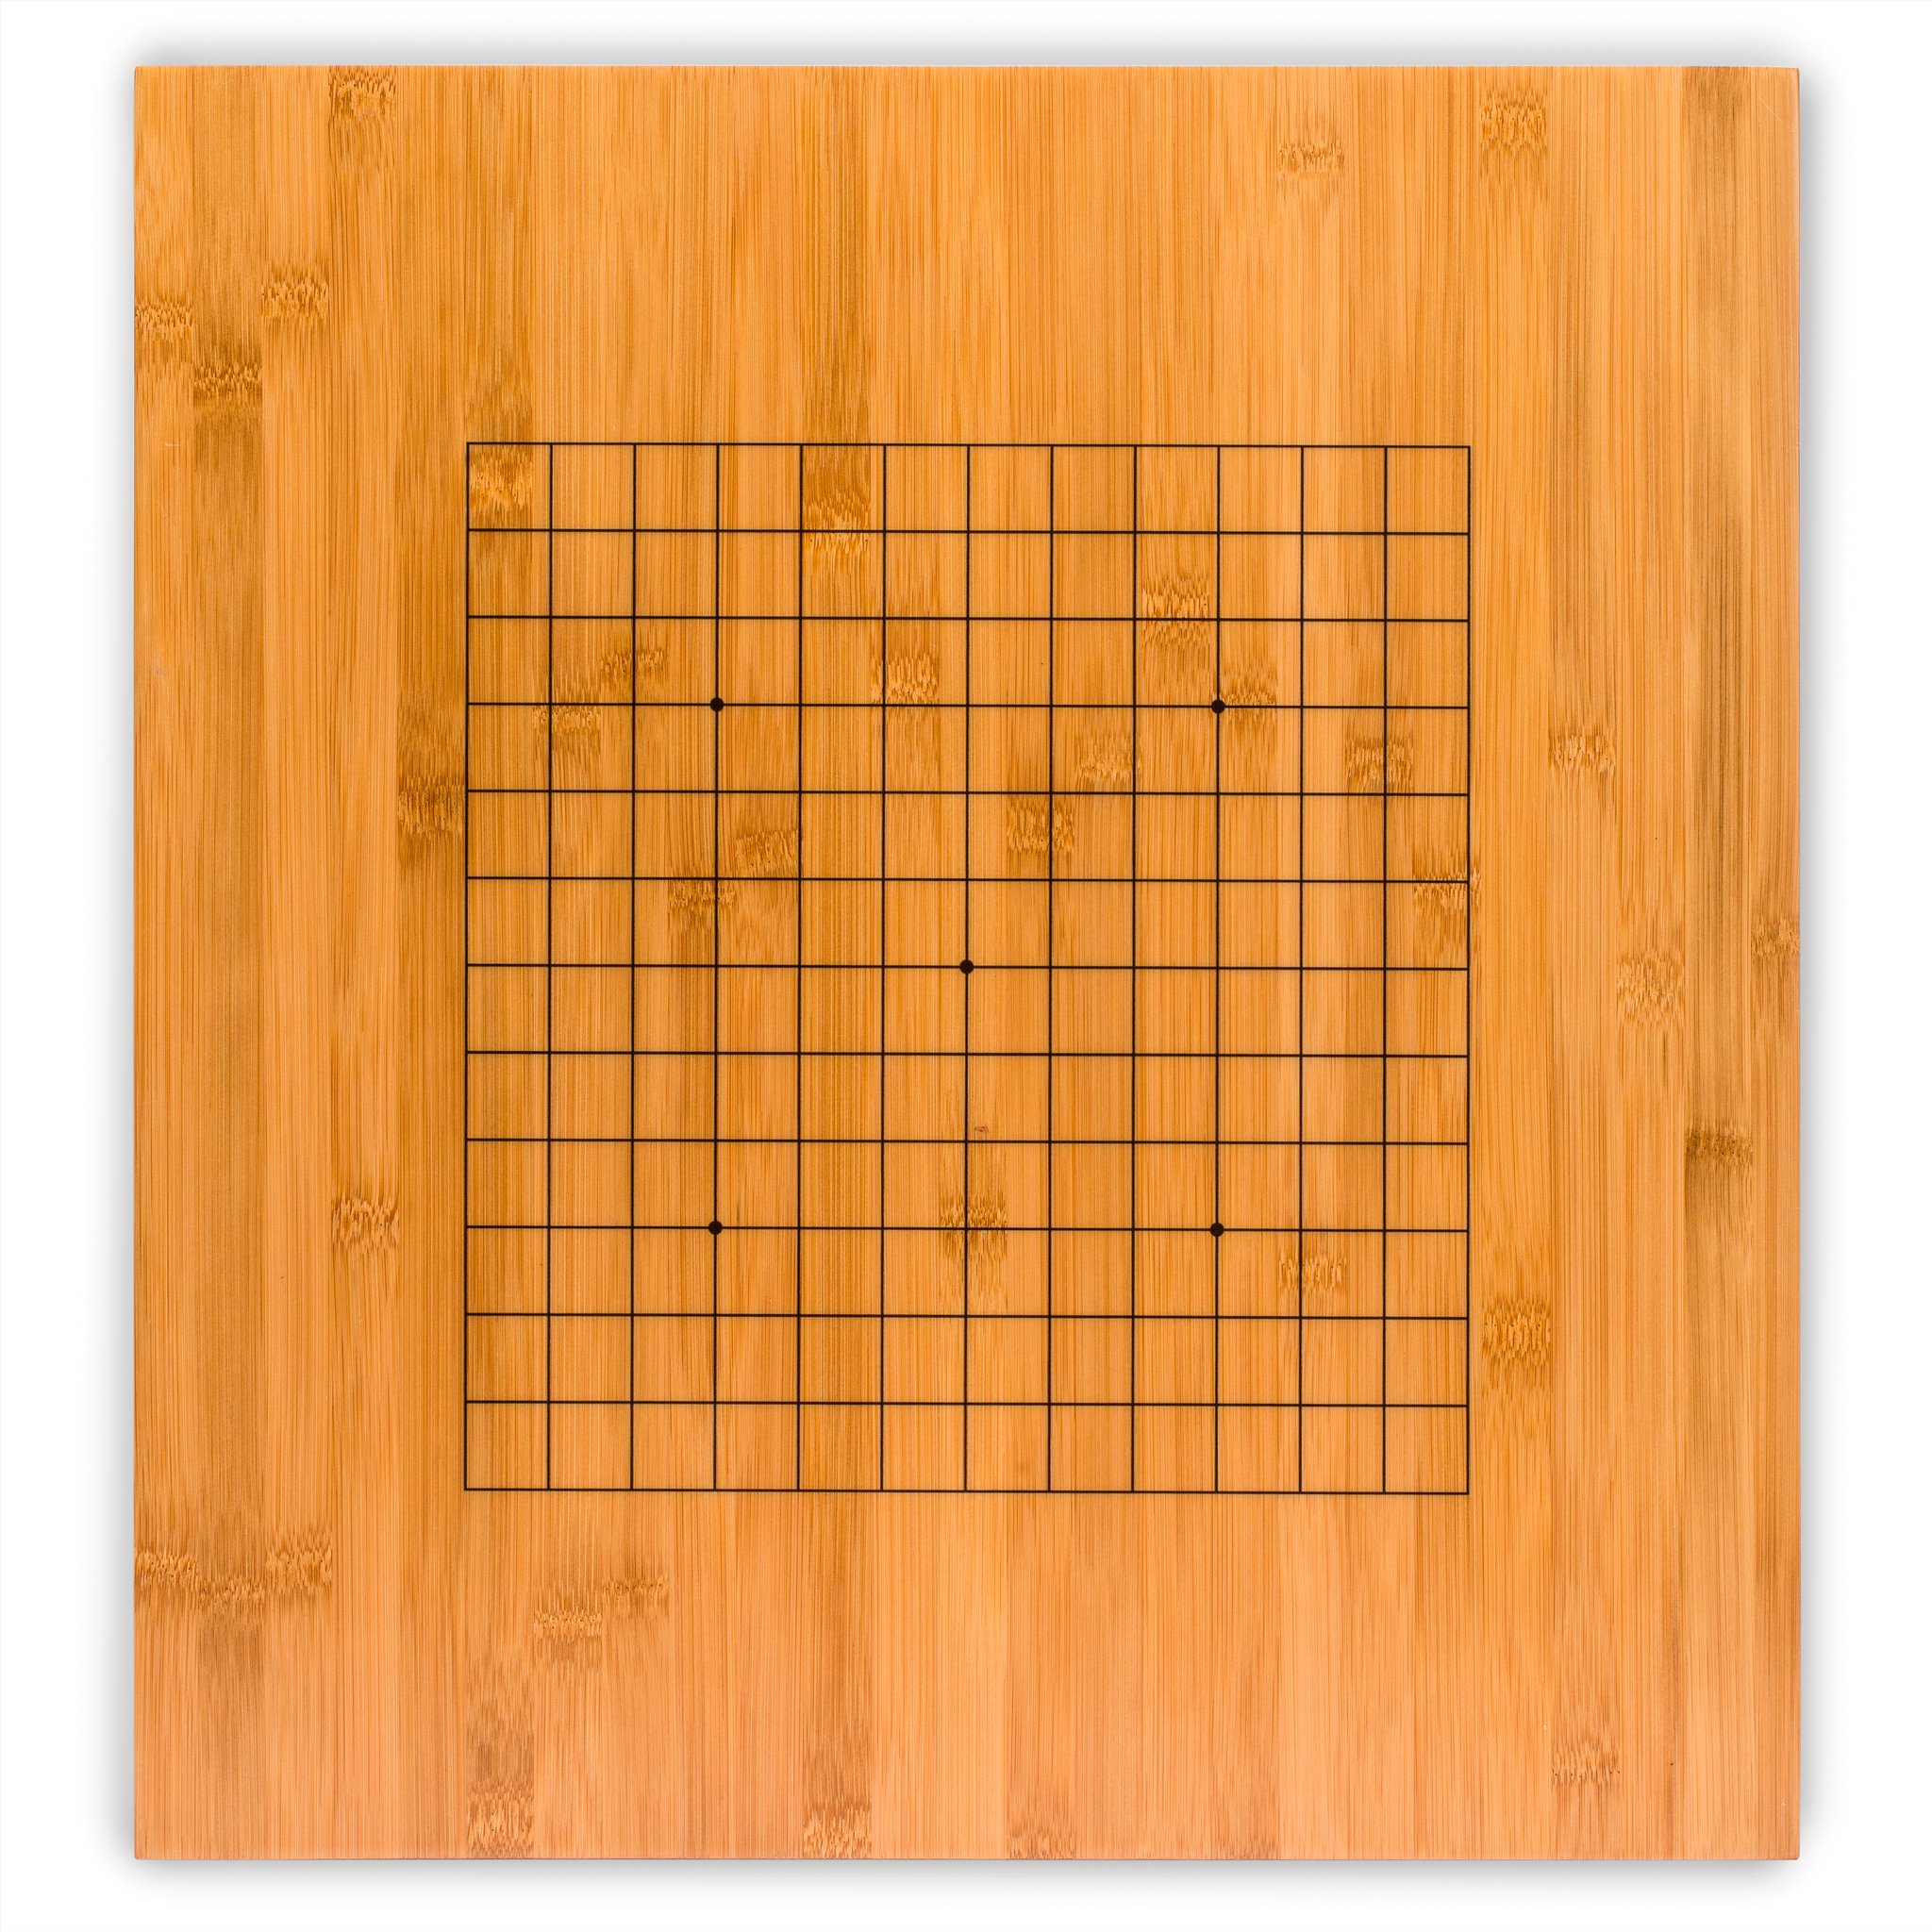 Yellow Mountain Imports Bamboo 0.8-Inch Reversible 19x19 / 13x13 Go Game Set Board with Double Convex Melamine Stones and Bamboo Bowls - Classic Strategy Board Game (Baduk/Weiqi)